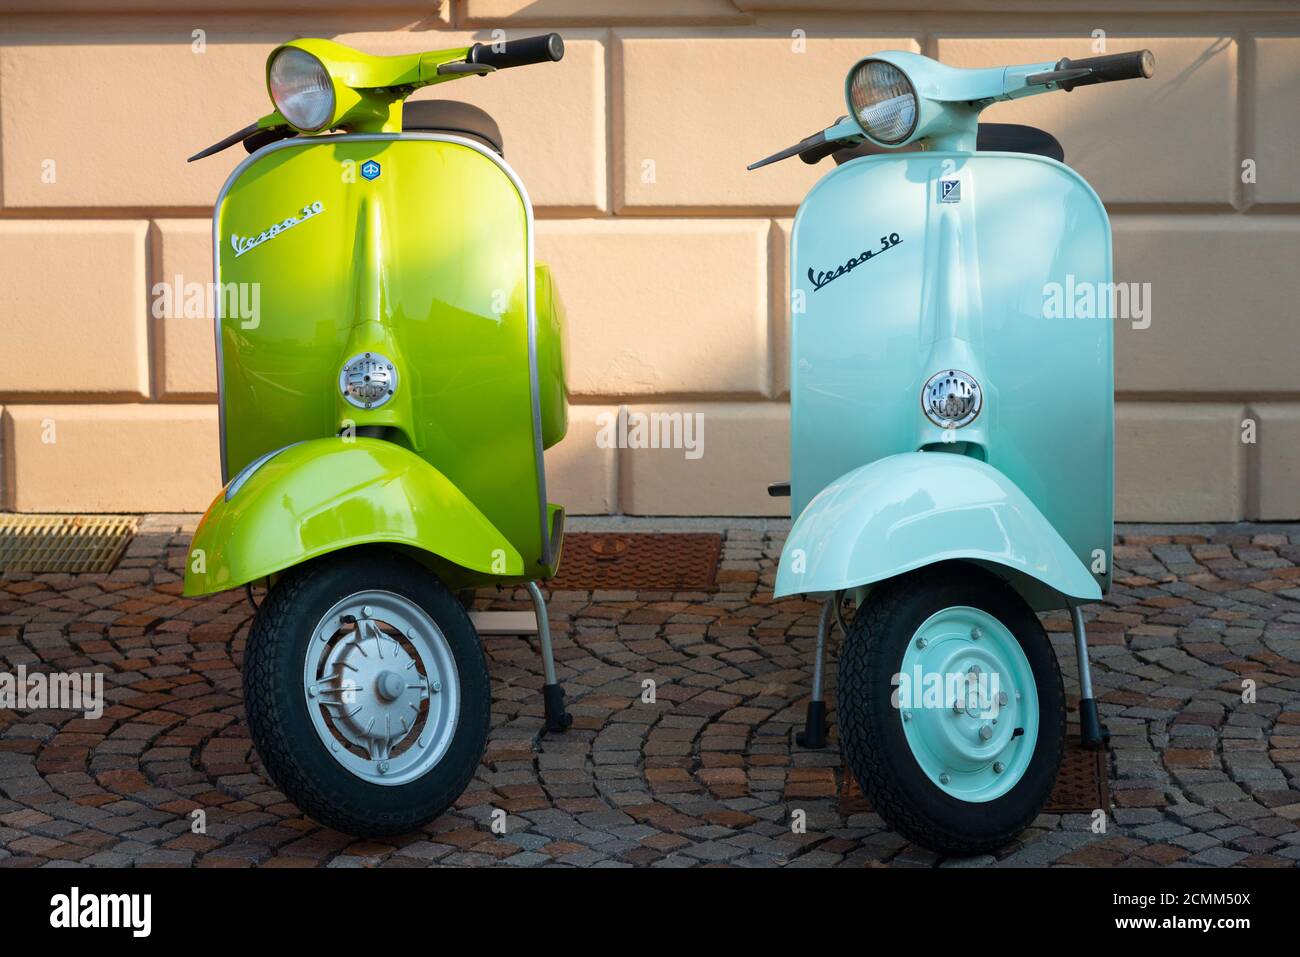 Italy, Lombardy, Meeting of Vintage Motorcycle, Scooter Piaggio Vespa Stock Photo